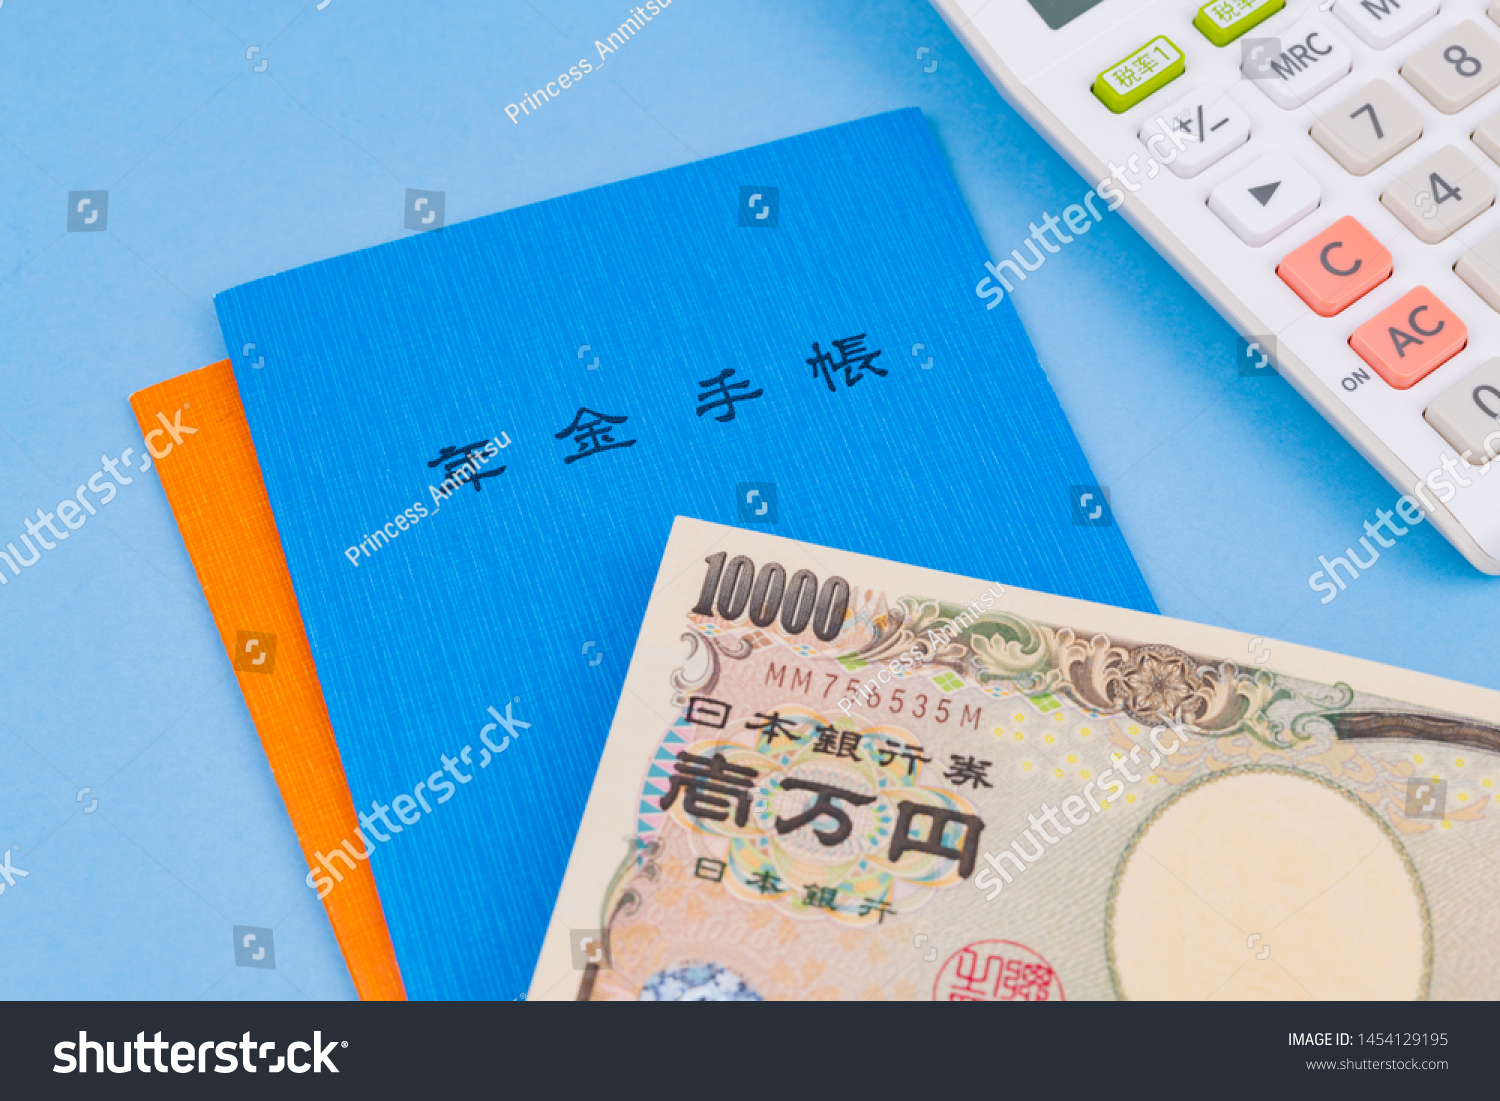 National Pension Handbook. Translation on notebook text: "Pension book" and "Social Insurance Agency". Translation on bill text: "Bank of Japan Tickets" "One hundred thousand yen" "The Bank of Japan". #1454129195